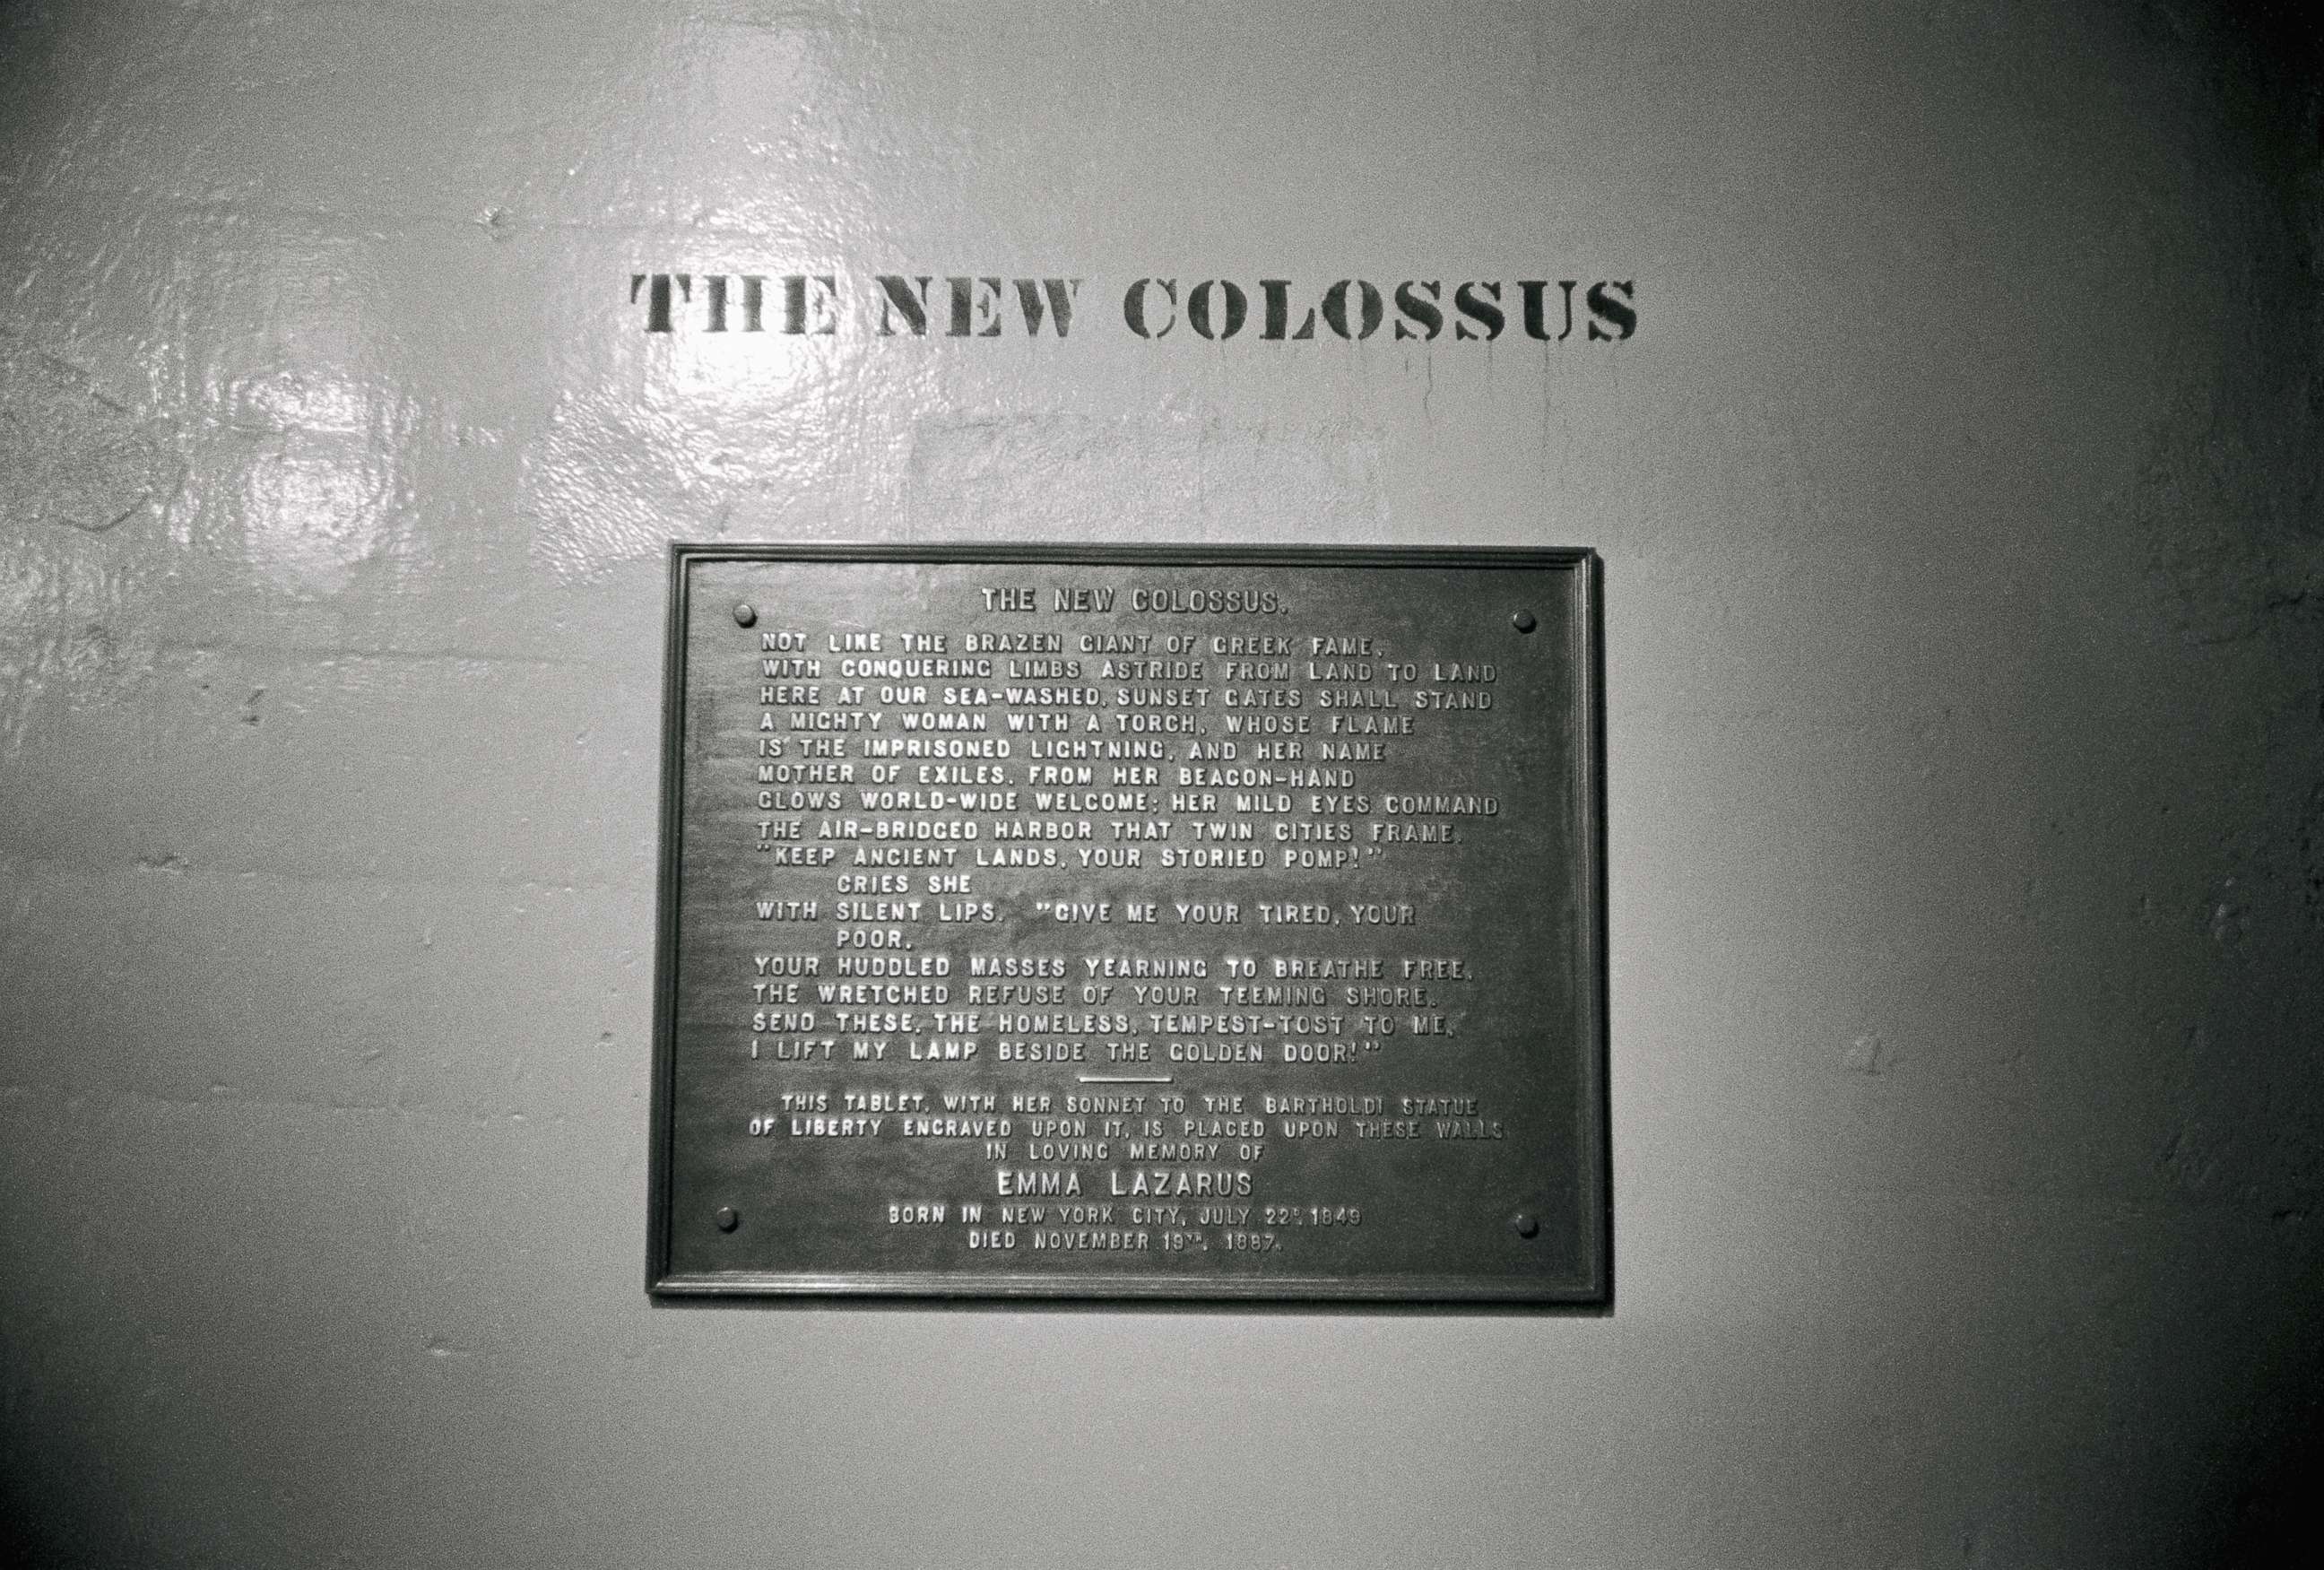 PHOTO: A plaque with a poem entitled "The New Colossus" by Emma Lazarus located on the base of the Statue of Liberty.